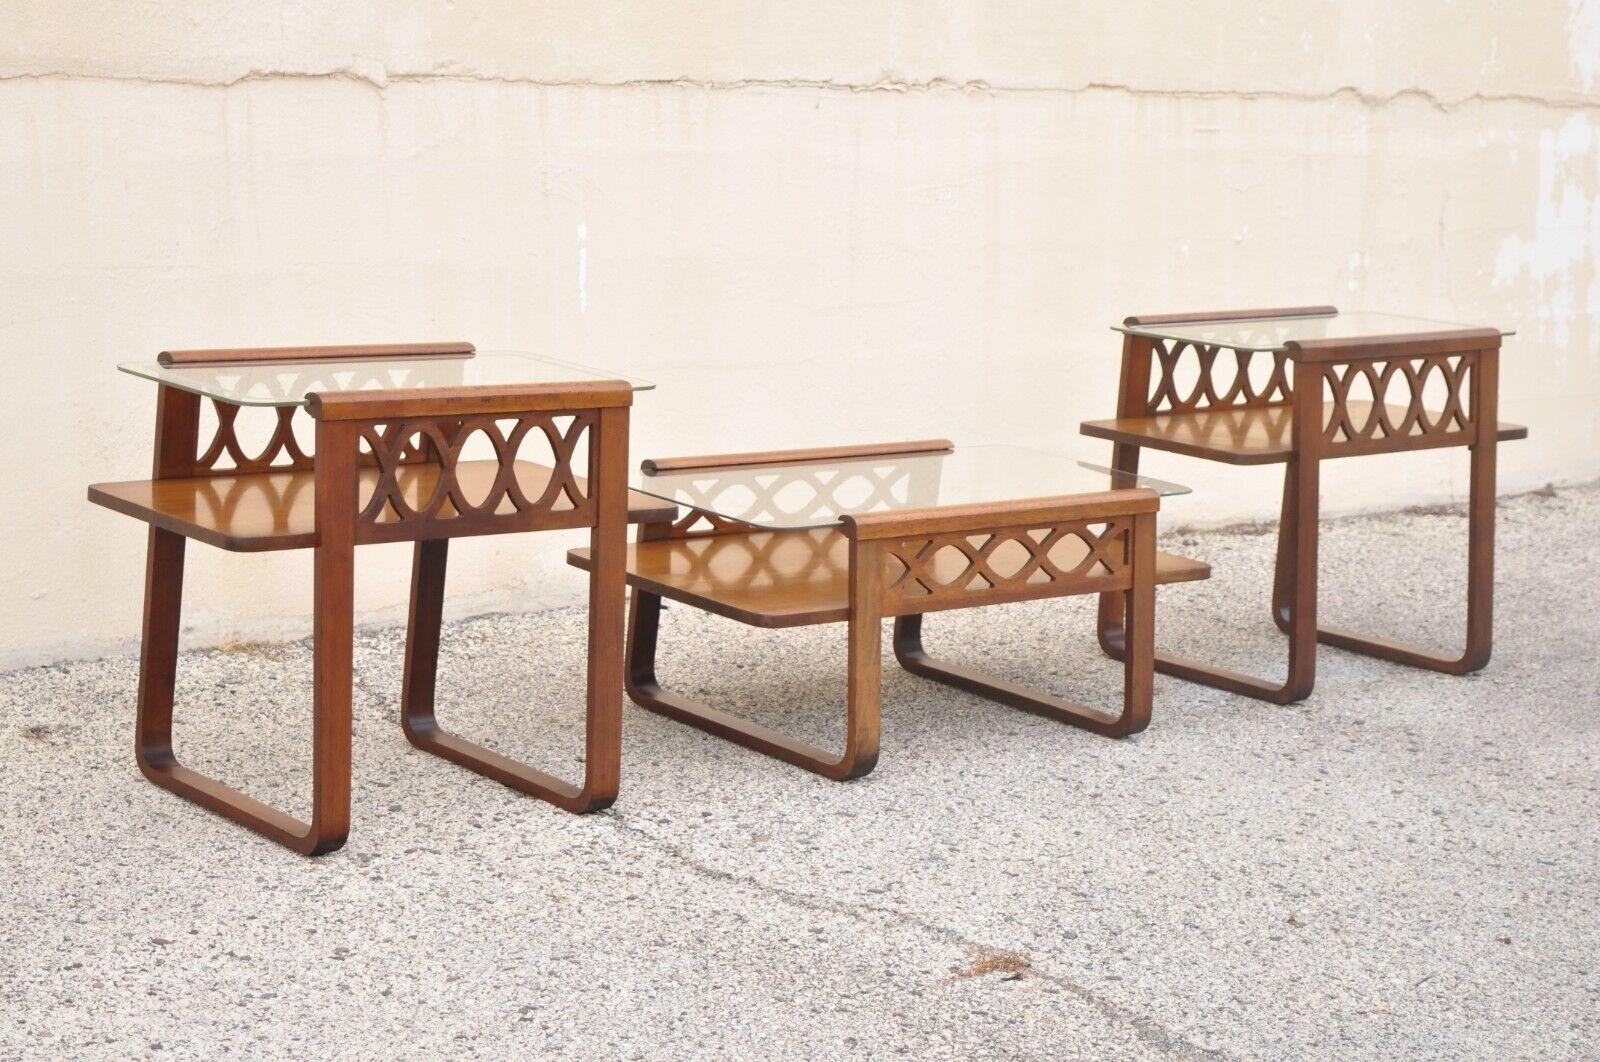 Vintage Art Deco Mid-Century Mahogany & Glass Coffee Table Set by Superior 3 Pc For Sale 7